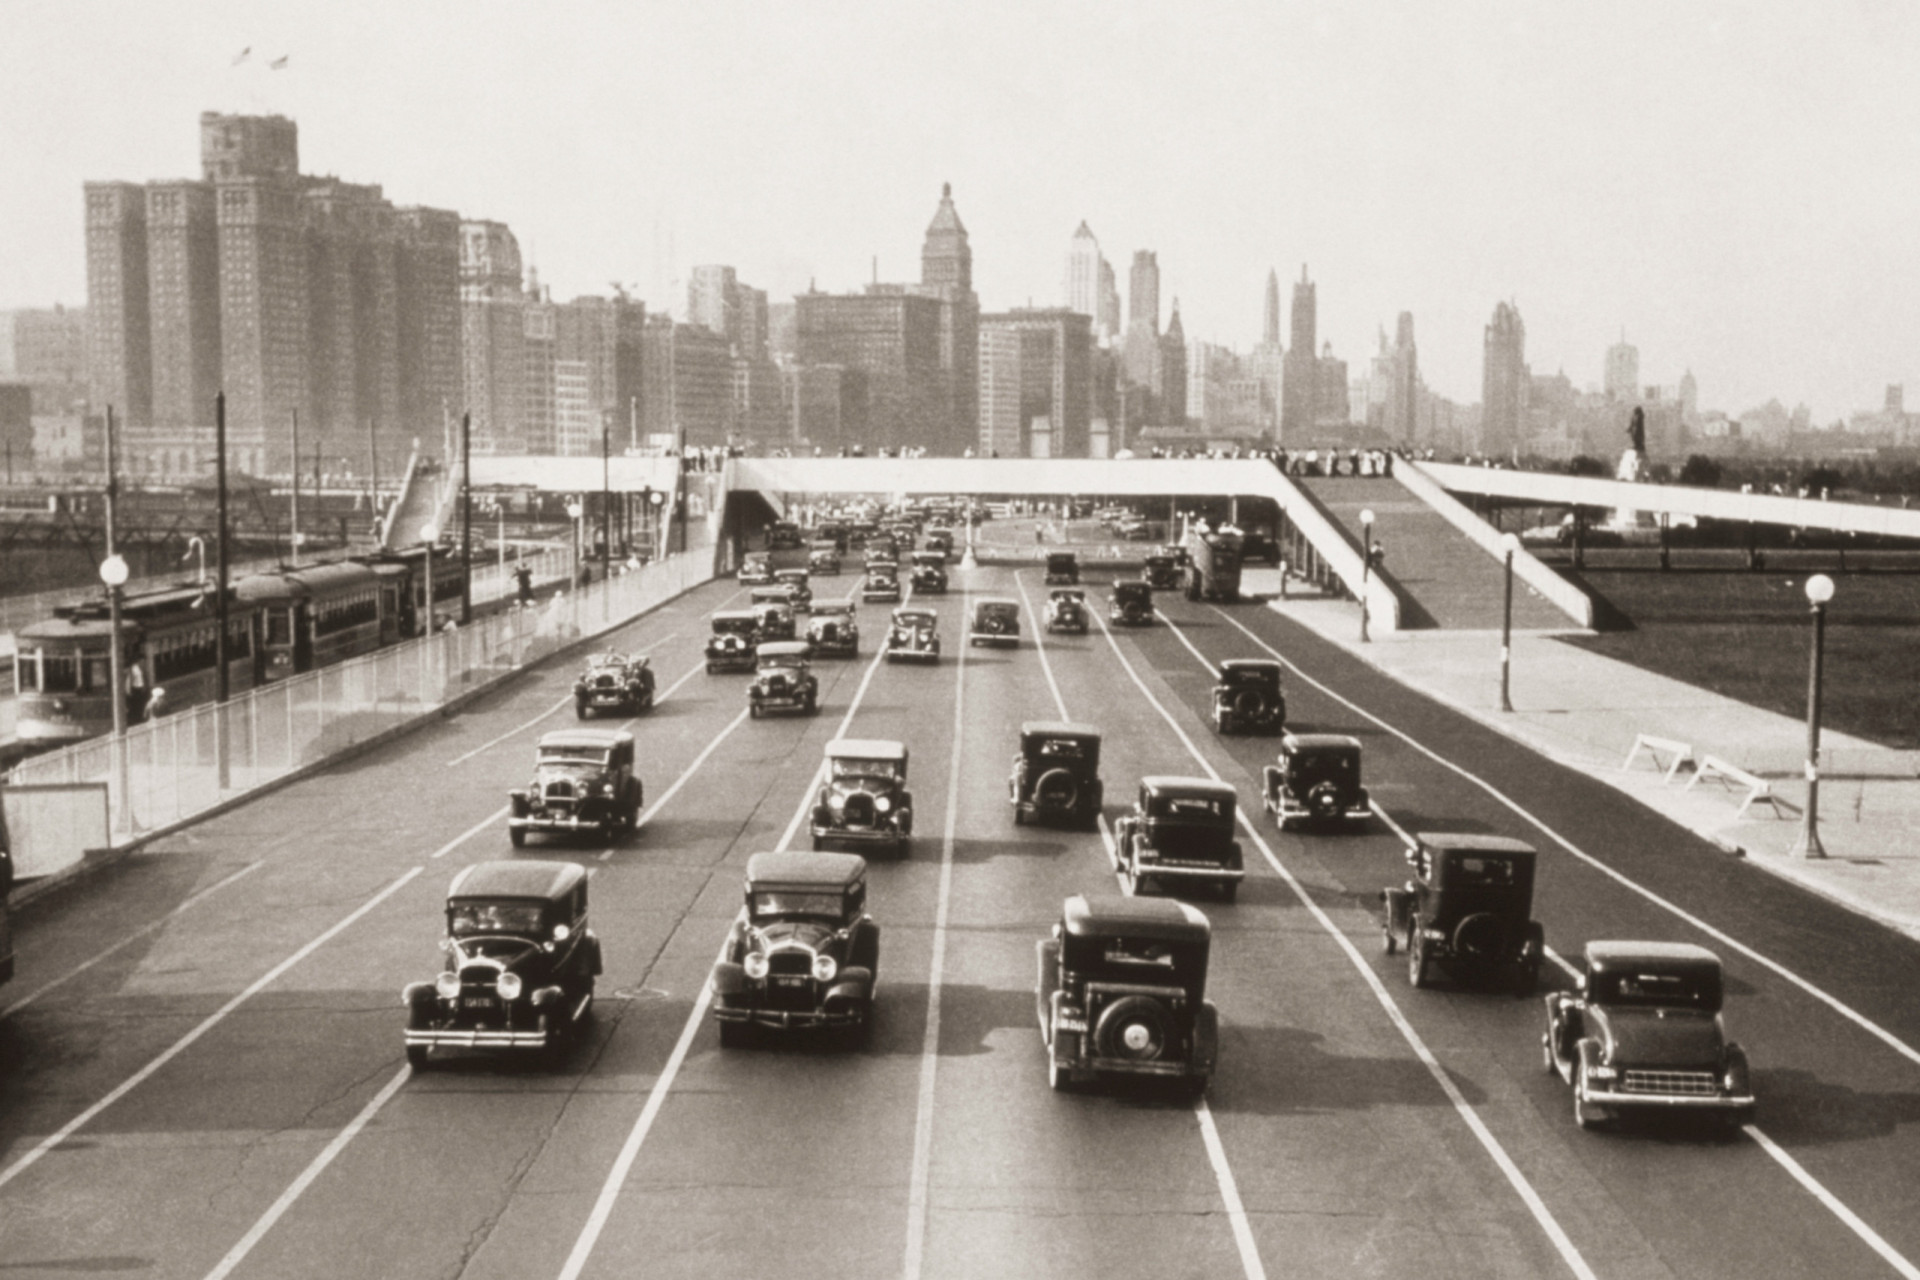 <p>Germany's impressive Autobahn system was not lost on the Americans. By the late 1930s, planning had expanded to a system of new superhighways across the nation. Pictured is traffic near Chicago.</p><p>You may also like:<a href="https://www.starsinsider.com/n/388254?utm_source=msn.com&utm_medium=display&utm_campaign=referral_description&utm_content=697904en-us"> These breeds make the purrfect house cats</a></p>